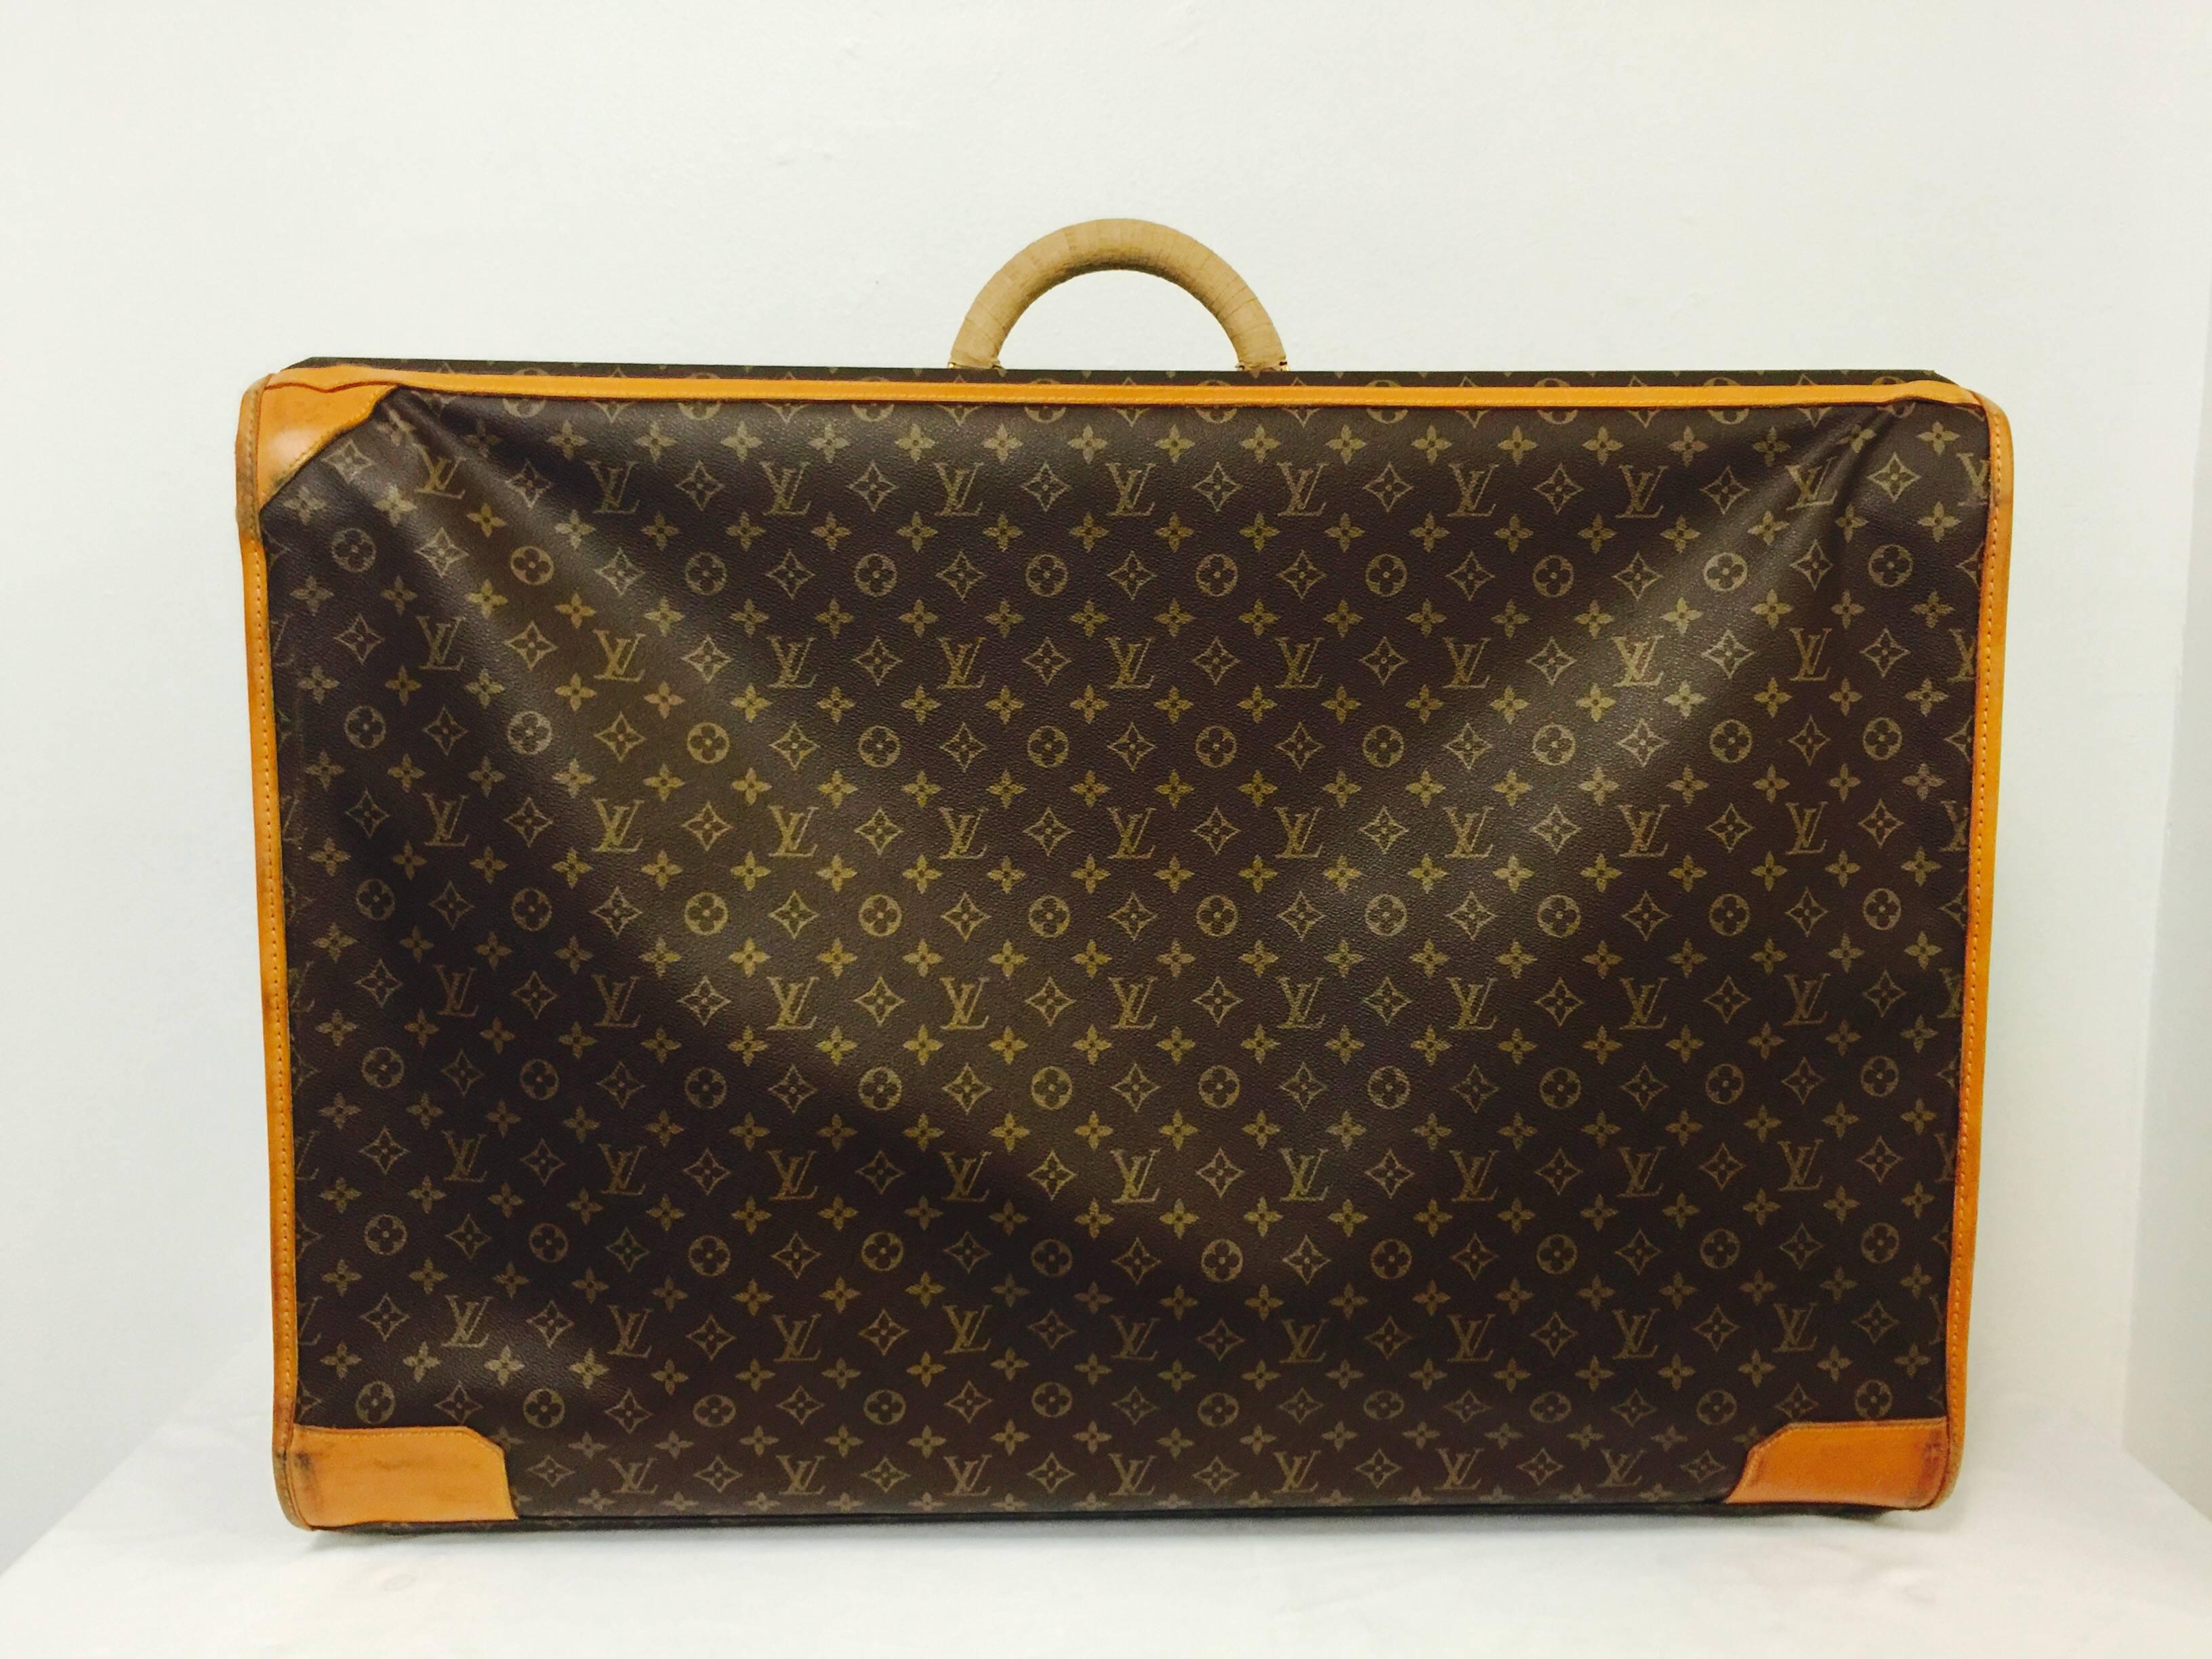 Luxurious Louis Vuitton Monogram Soft Sided Canvas Pullman 80 With Combination Lock and New Handle speaks for itself.  Featuring signature, world-renowned monogram canvas and Vachetta leather, Louis Vuitton luggage is not only instantly recognizable